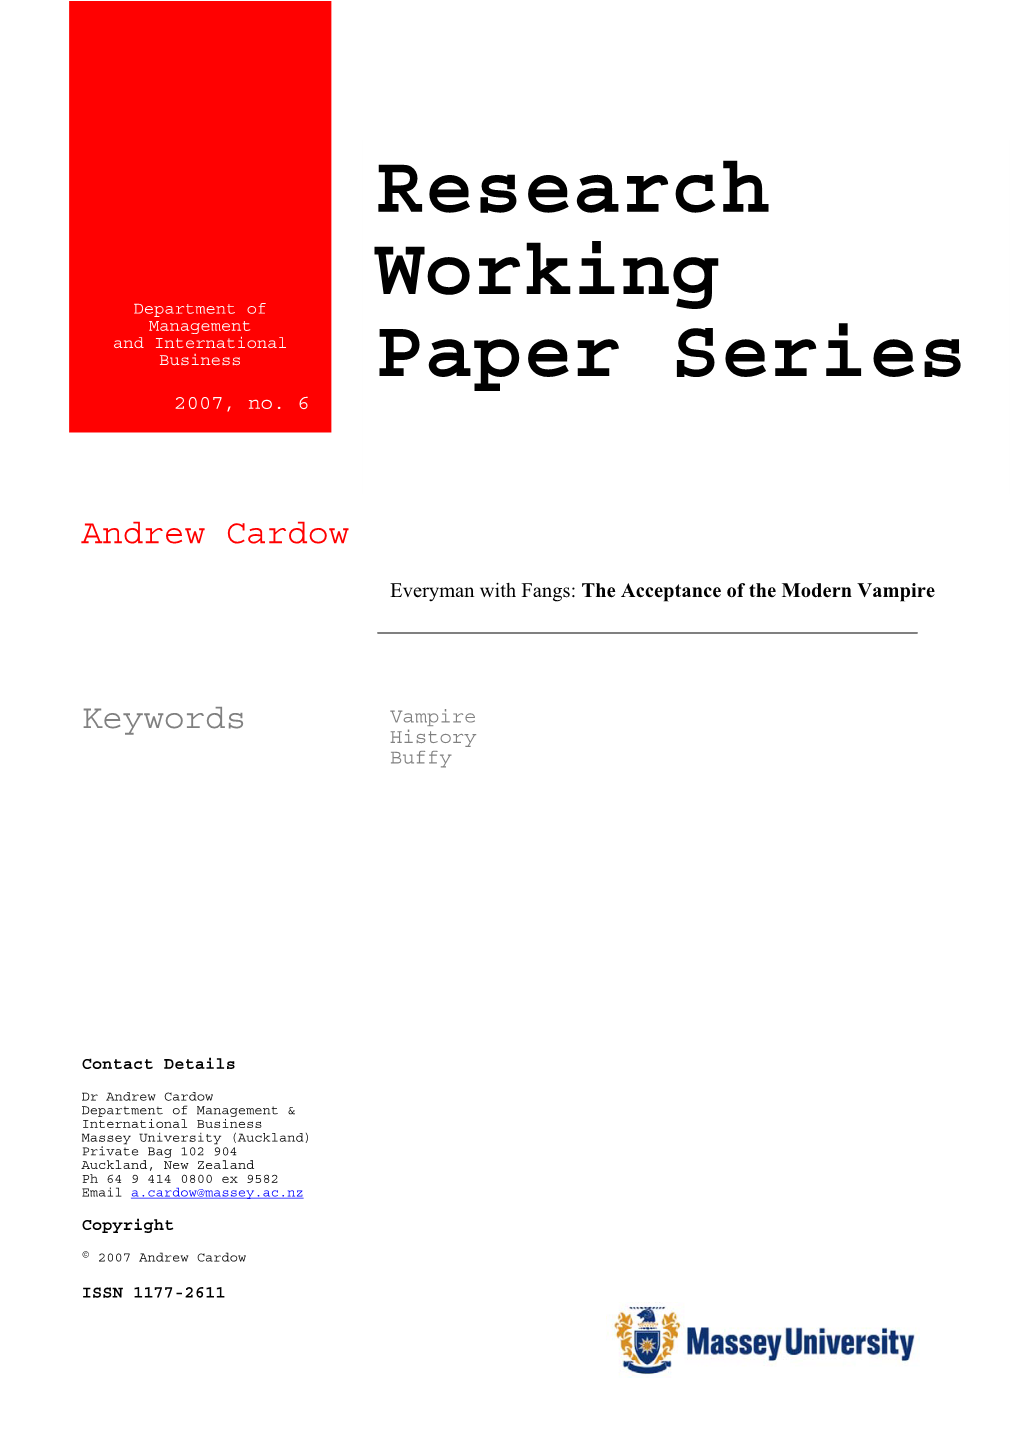 Research Working Paper Series